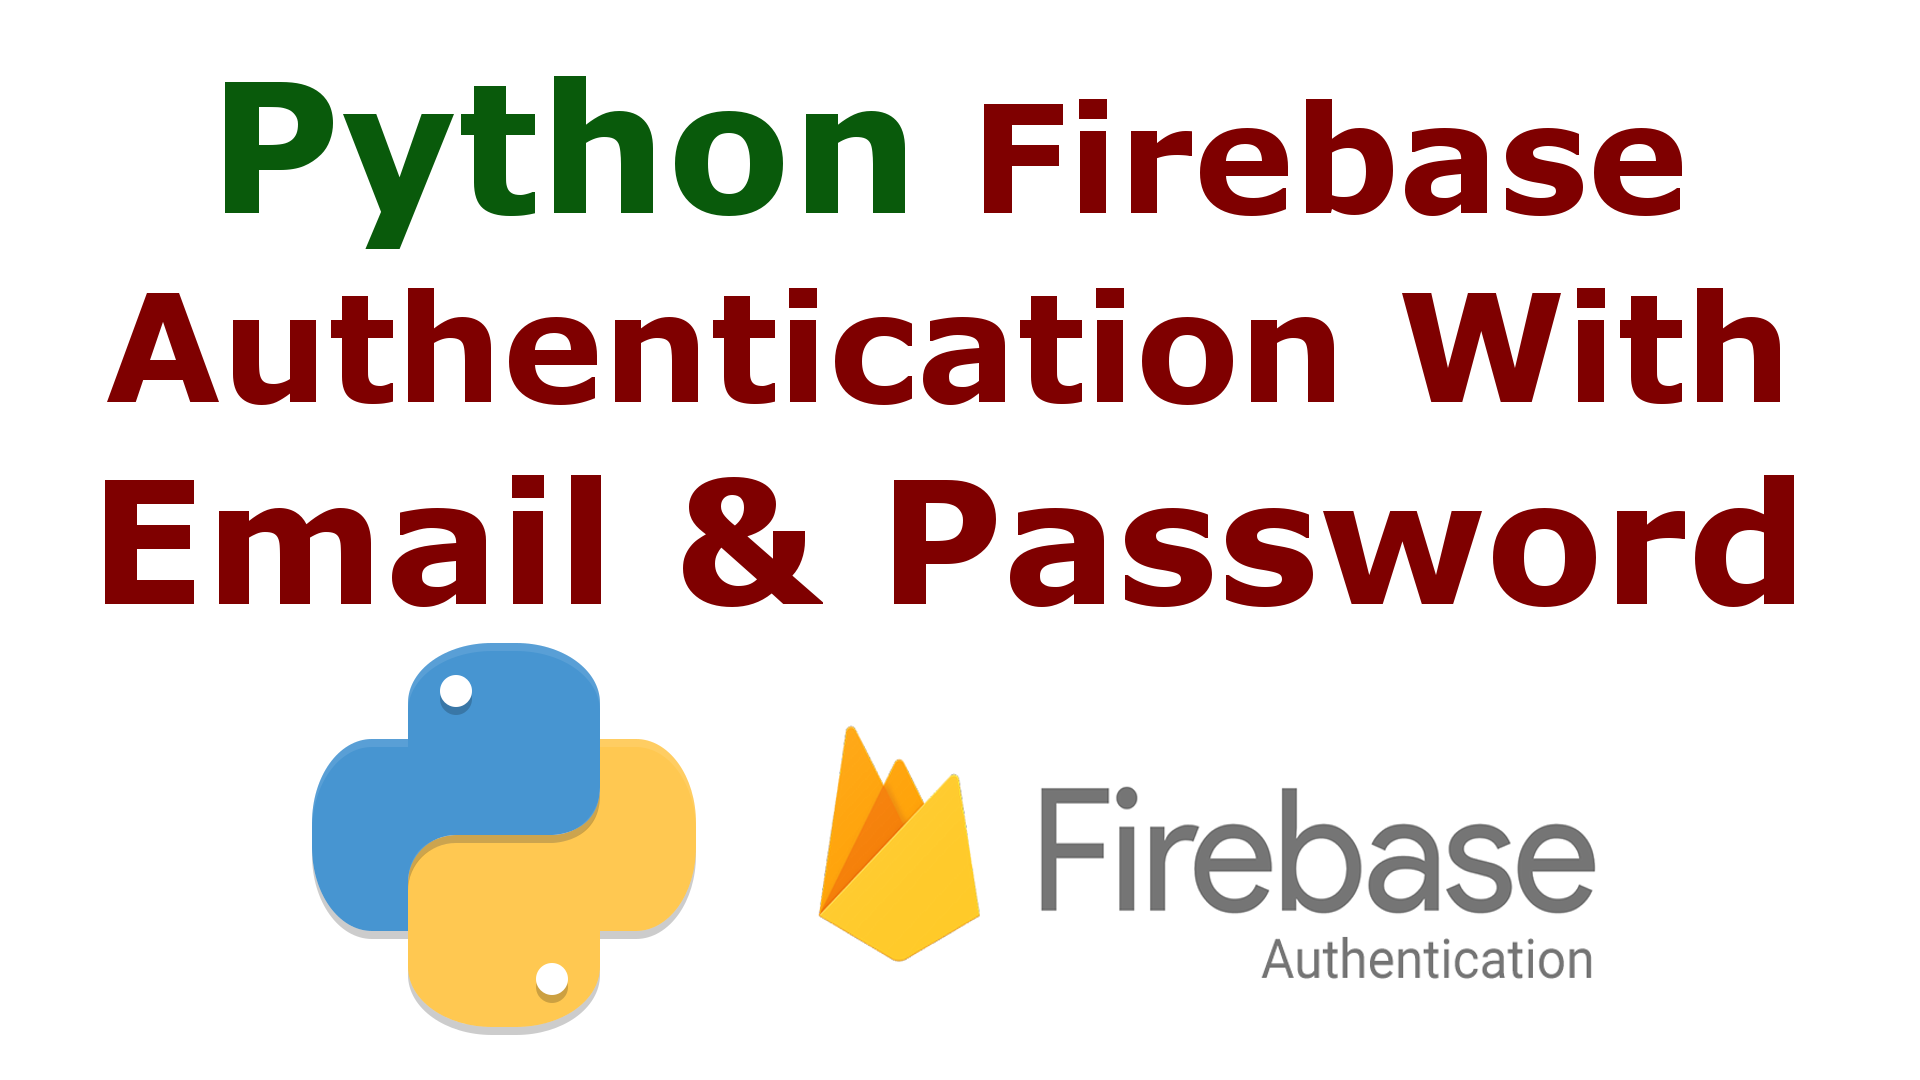 Python Firebase Authentication with Email & Password